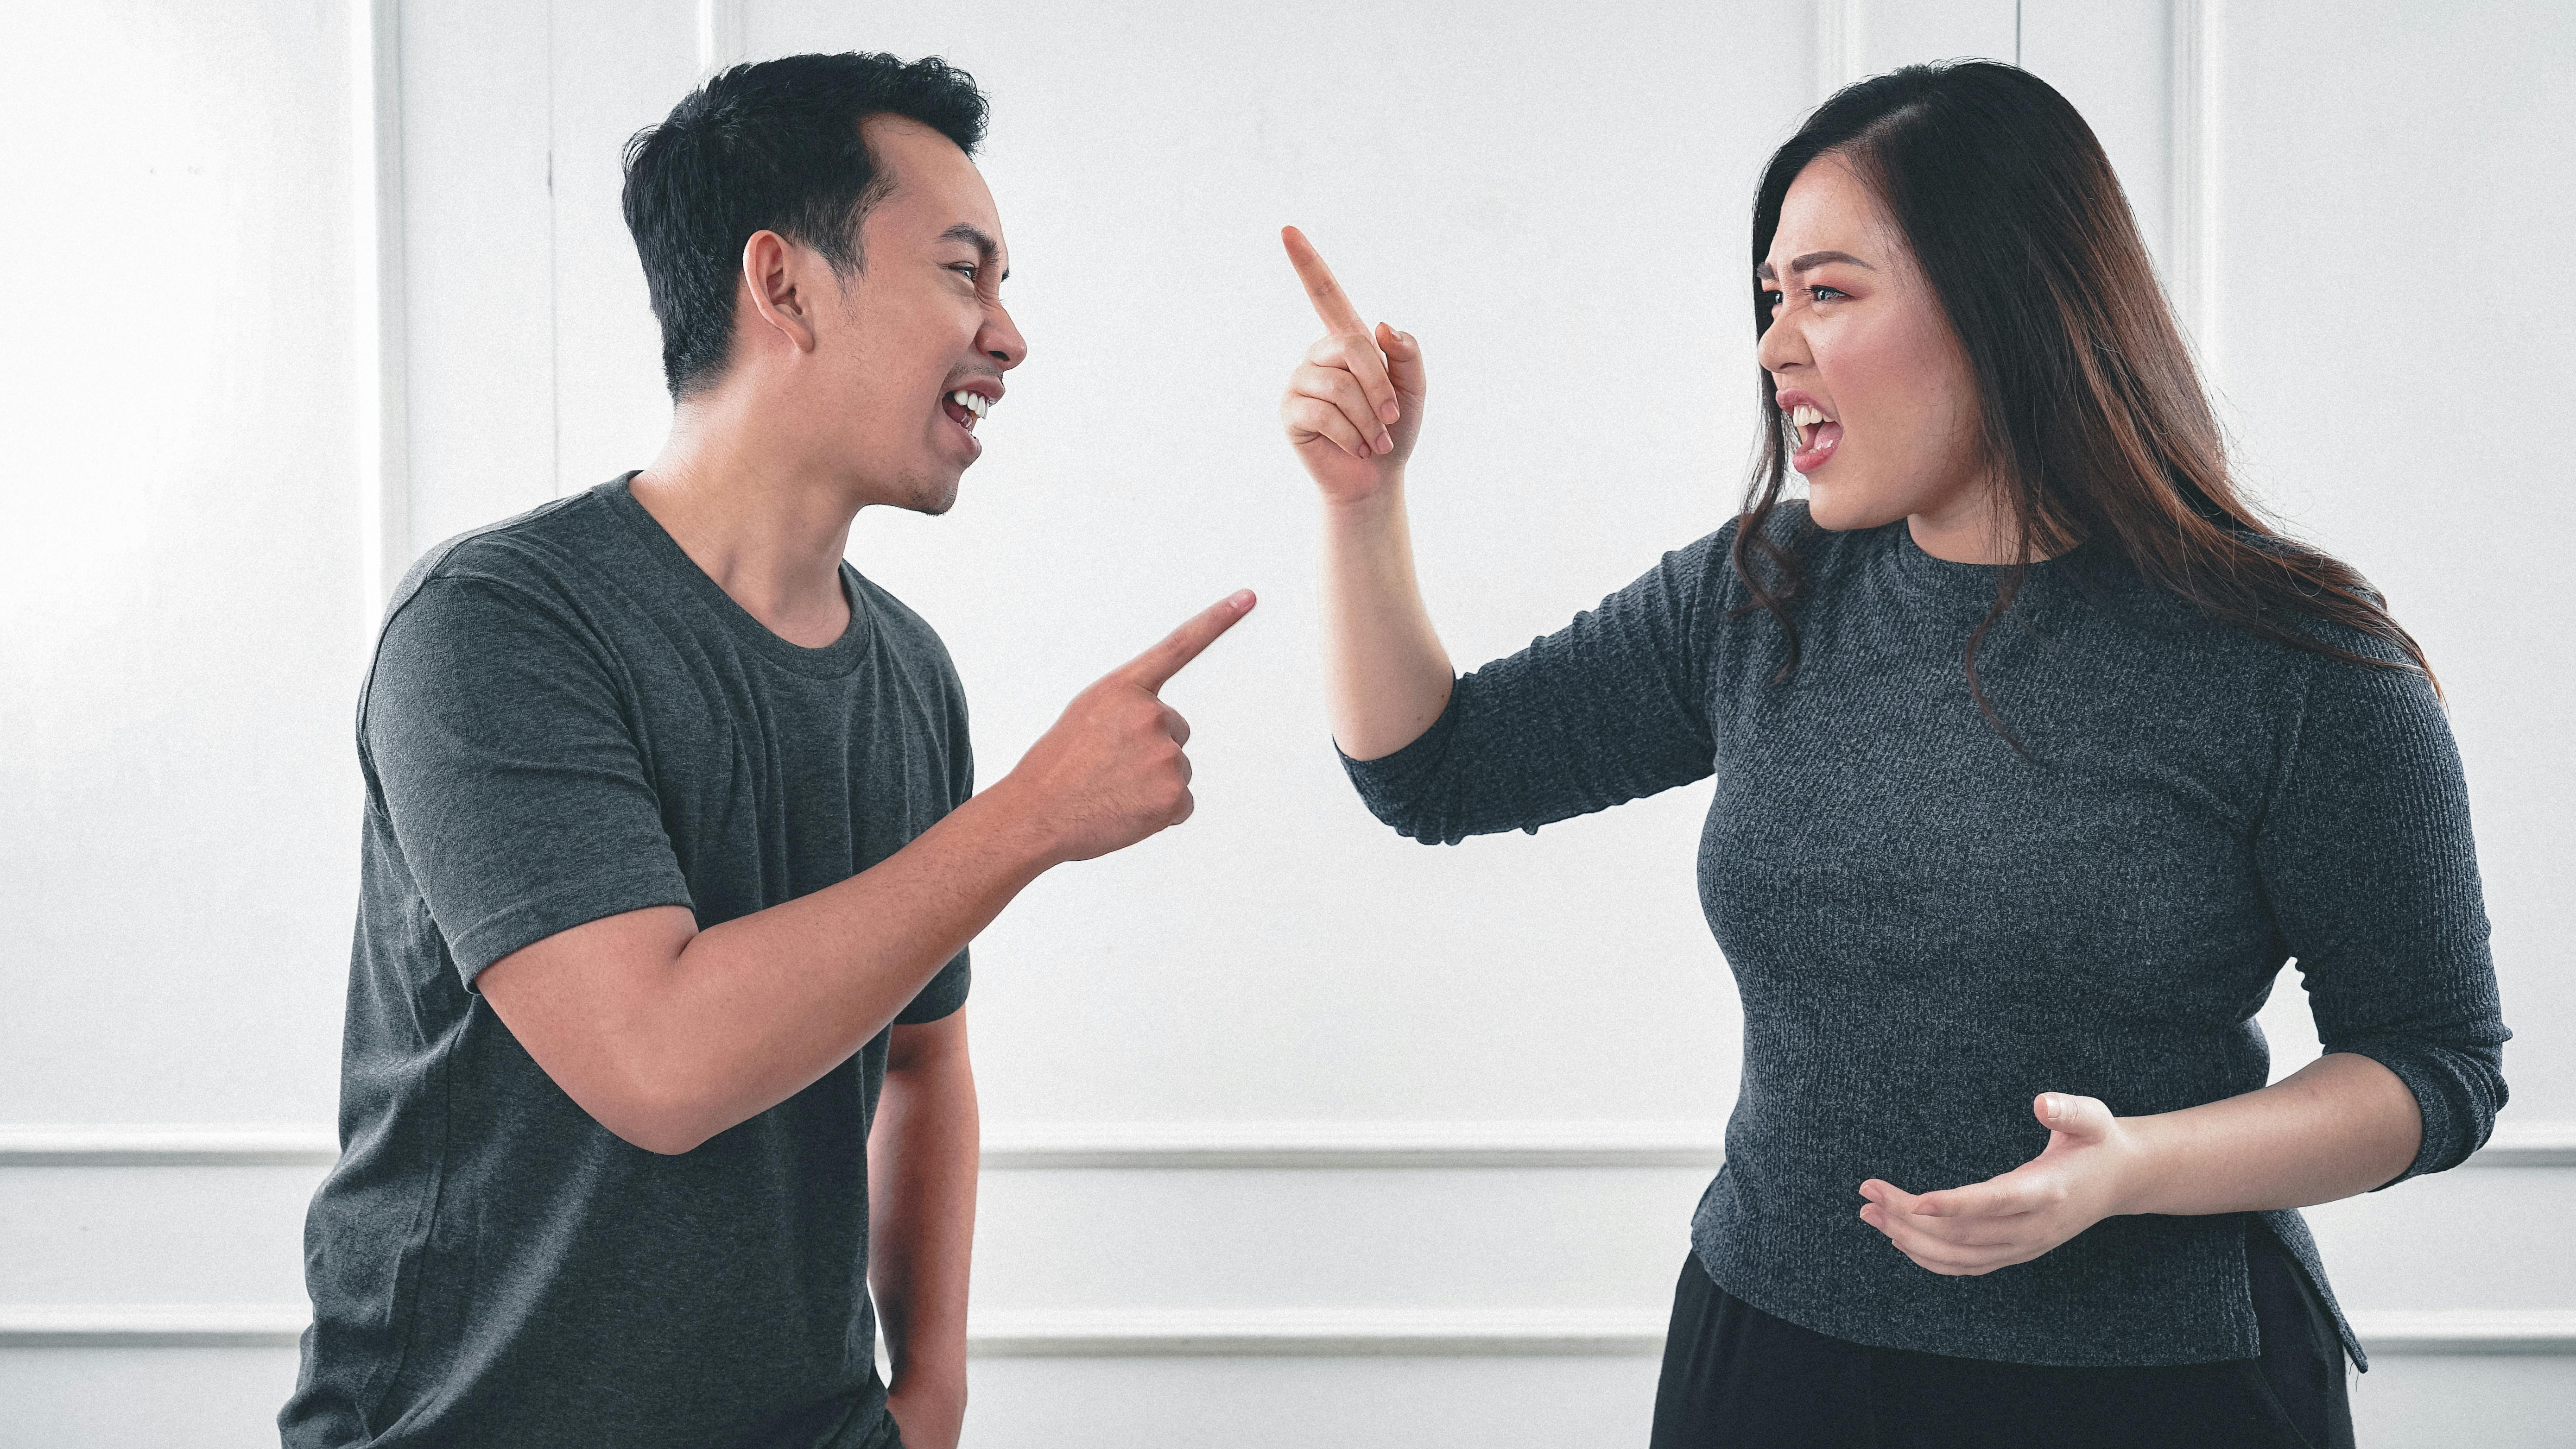 A man and a woman arguing while pointing fingers at each other | Source: Pexels